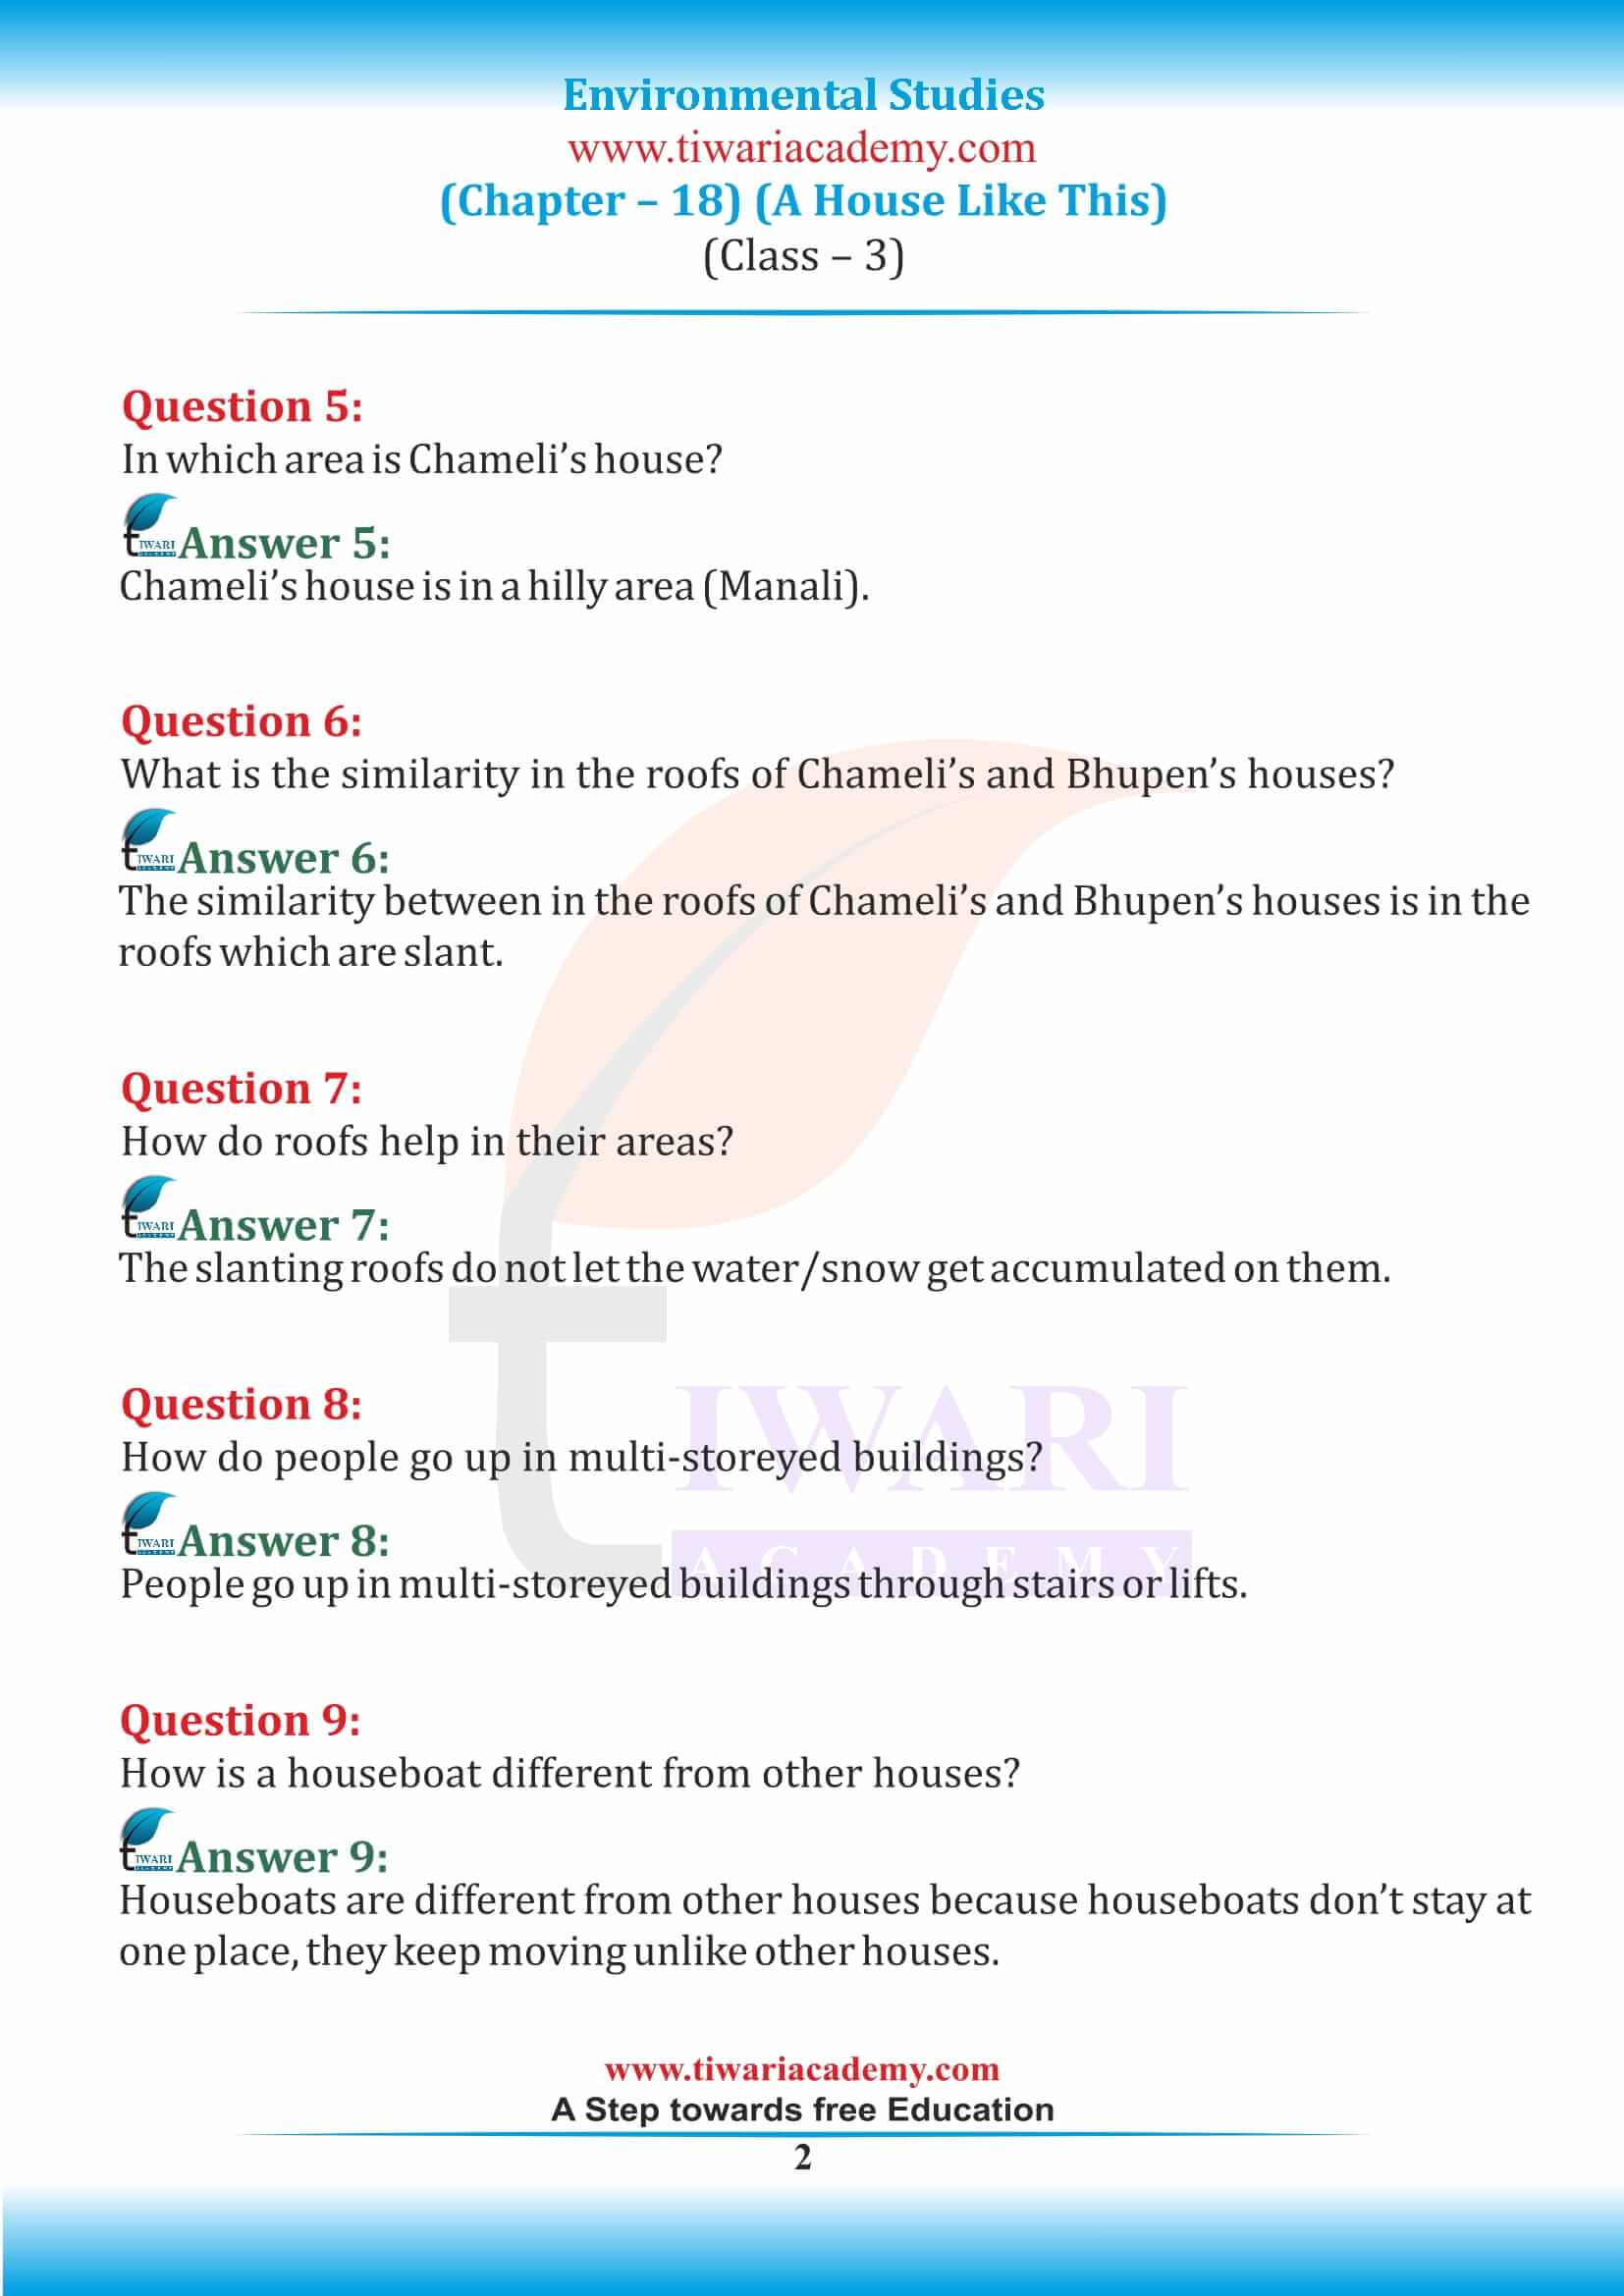 NCERT Solutions for Class 3 EVS Chapter 18